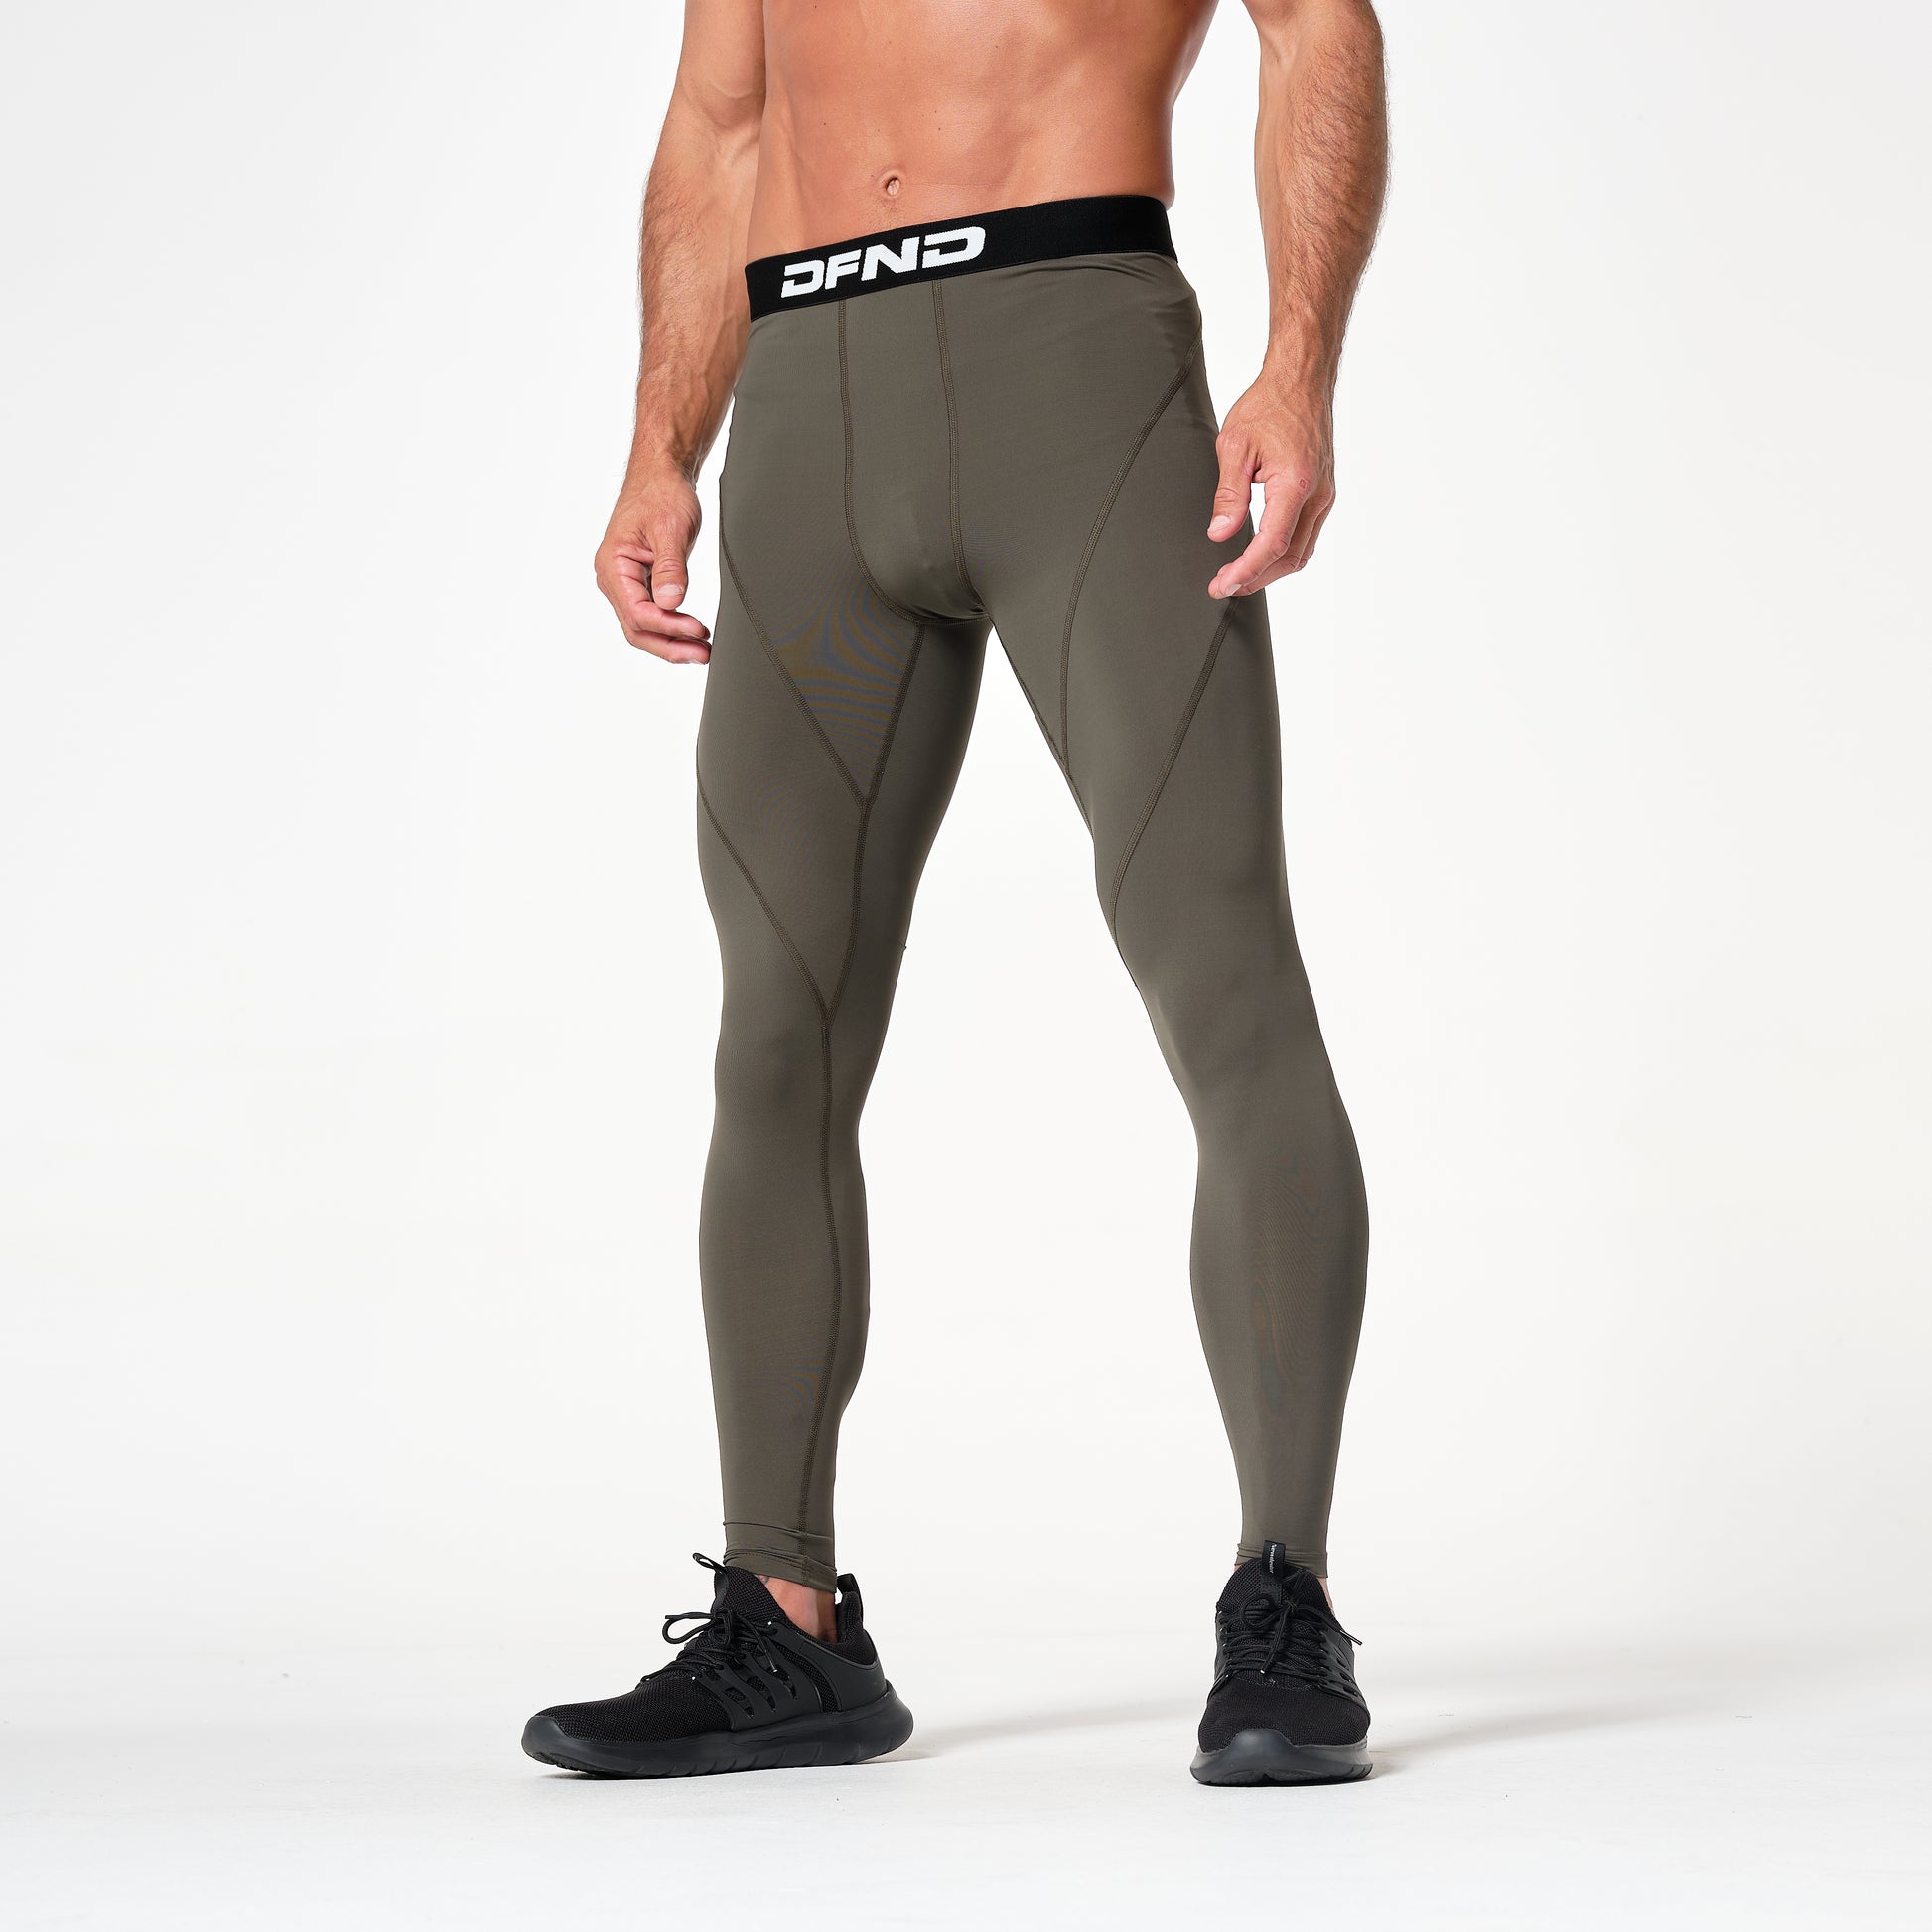 Womens UA Collections - Fitted Fit Leggings in Black for Military Tactical